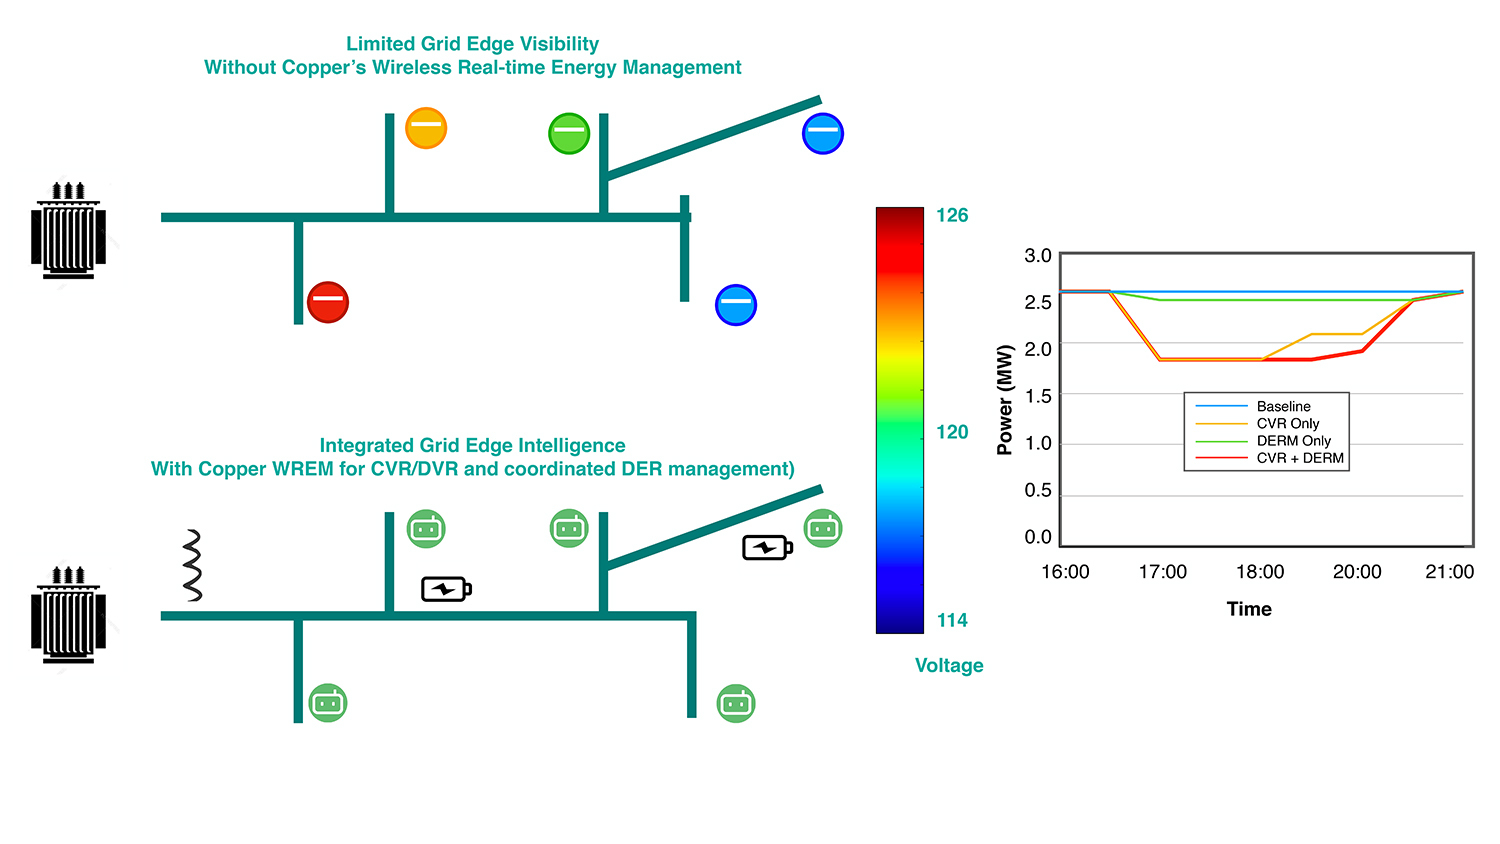 Image illustrating the difference between "Limited Grid-Edge Visibility and Unoptimized Voltage" and "Integrated Grid-Edge Intelligence with WREM and Coordinated DER Management"